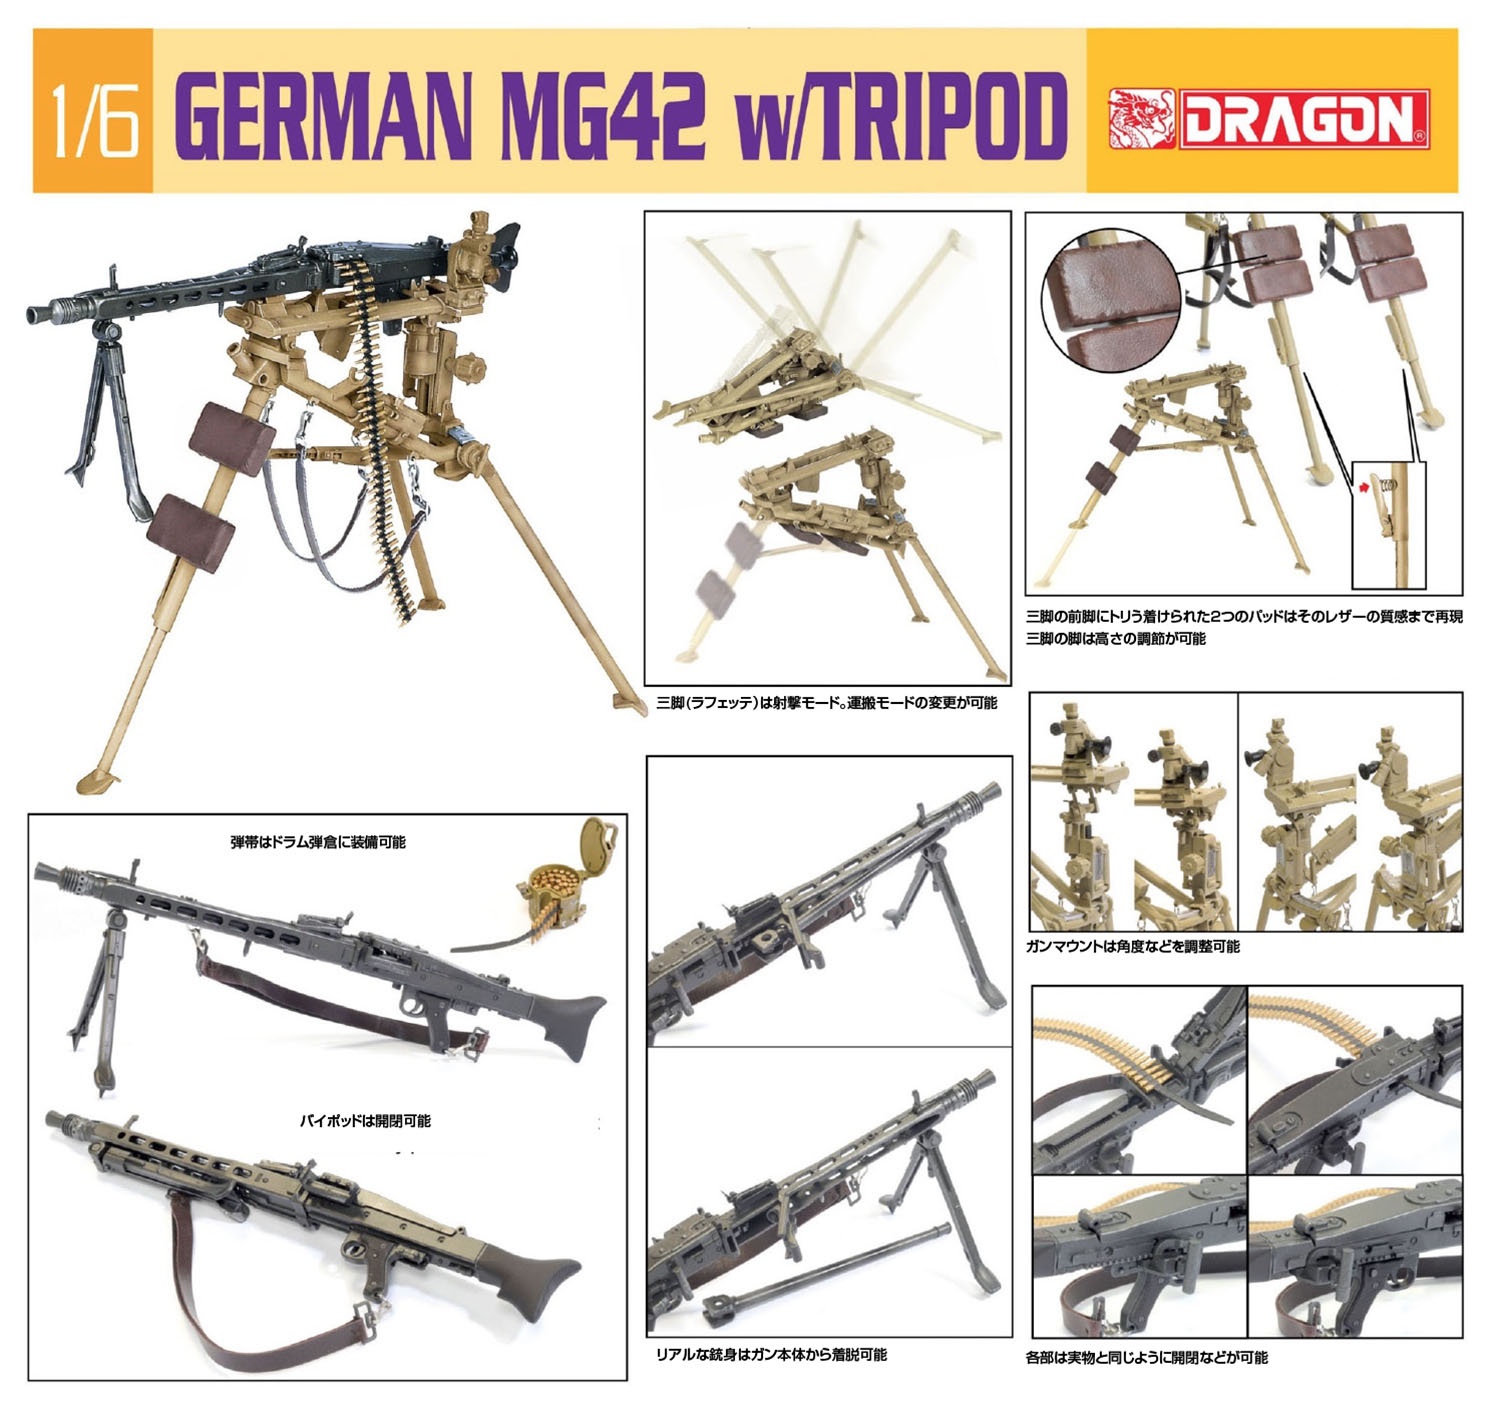 1/6 DRAGON DID GERMAN MG42 MG 34 DRUM MAGAZINES WITH CASE NEW. 